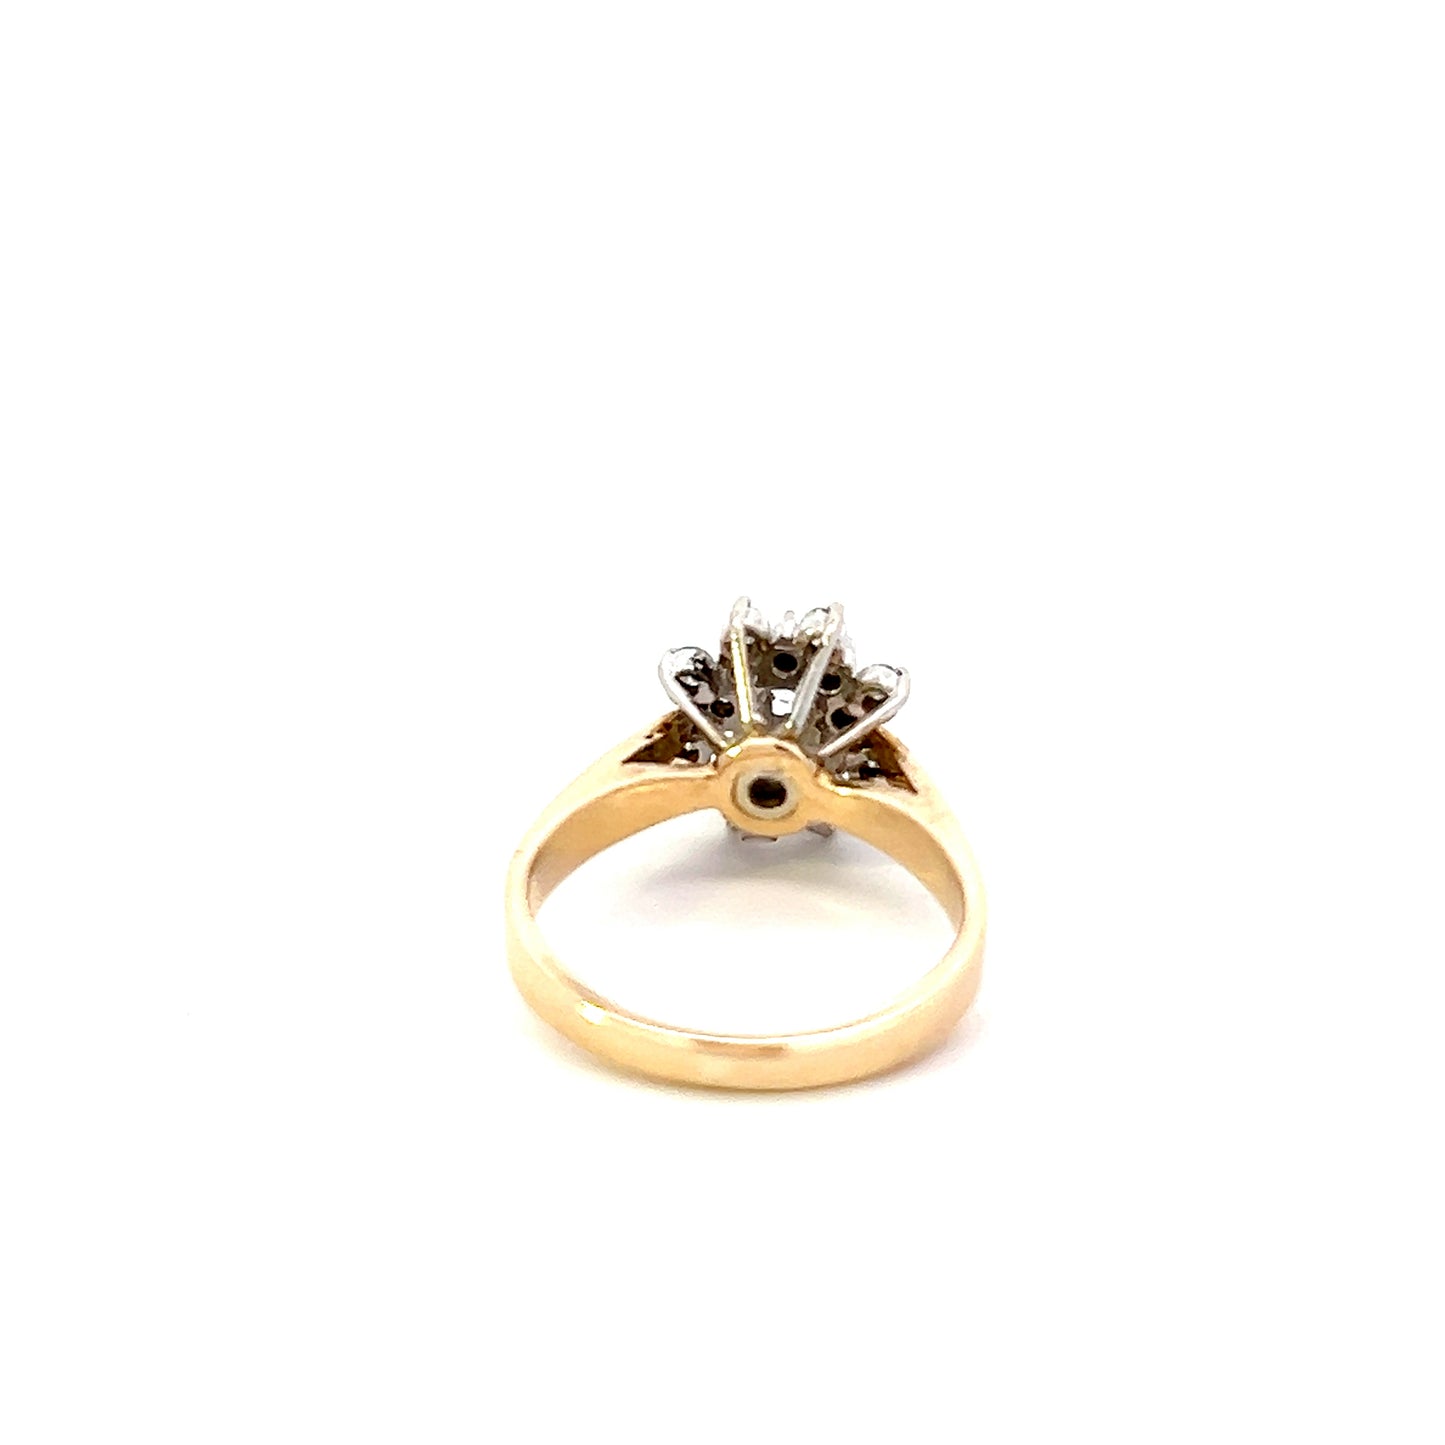 Mid Centry Flower Style Diamond Cluster Ring in Yellow Gold - 14k - .58ctw - Size 5